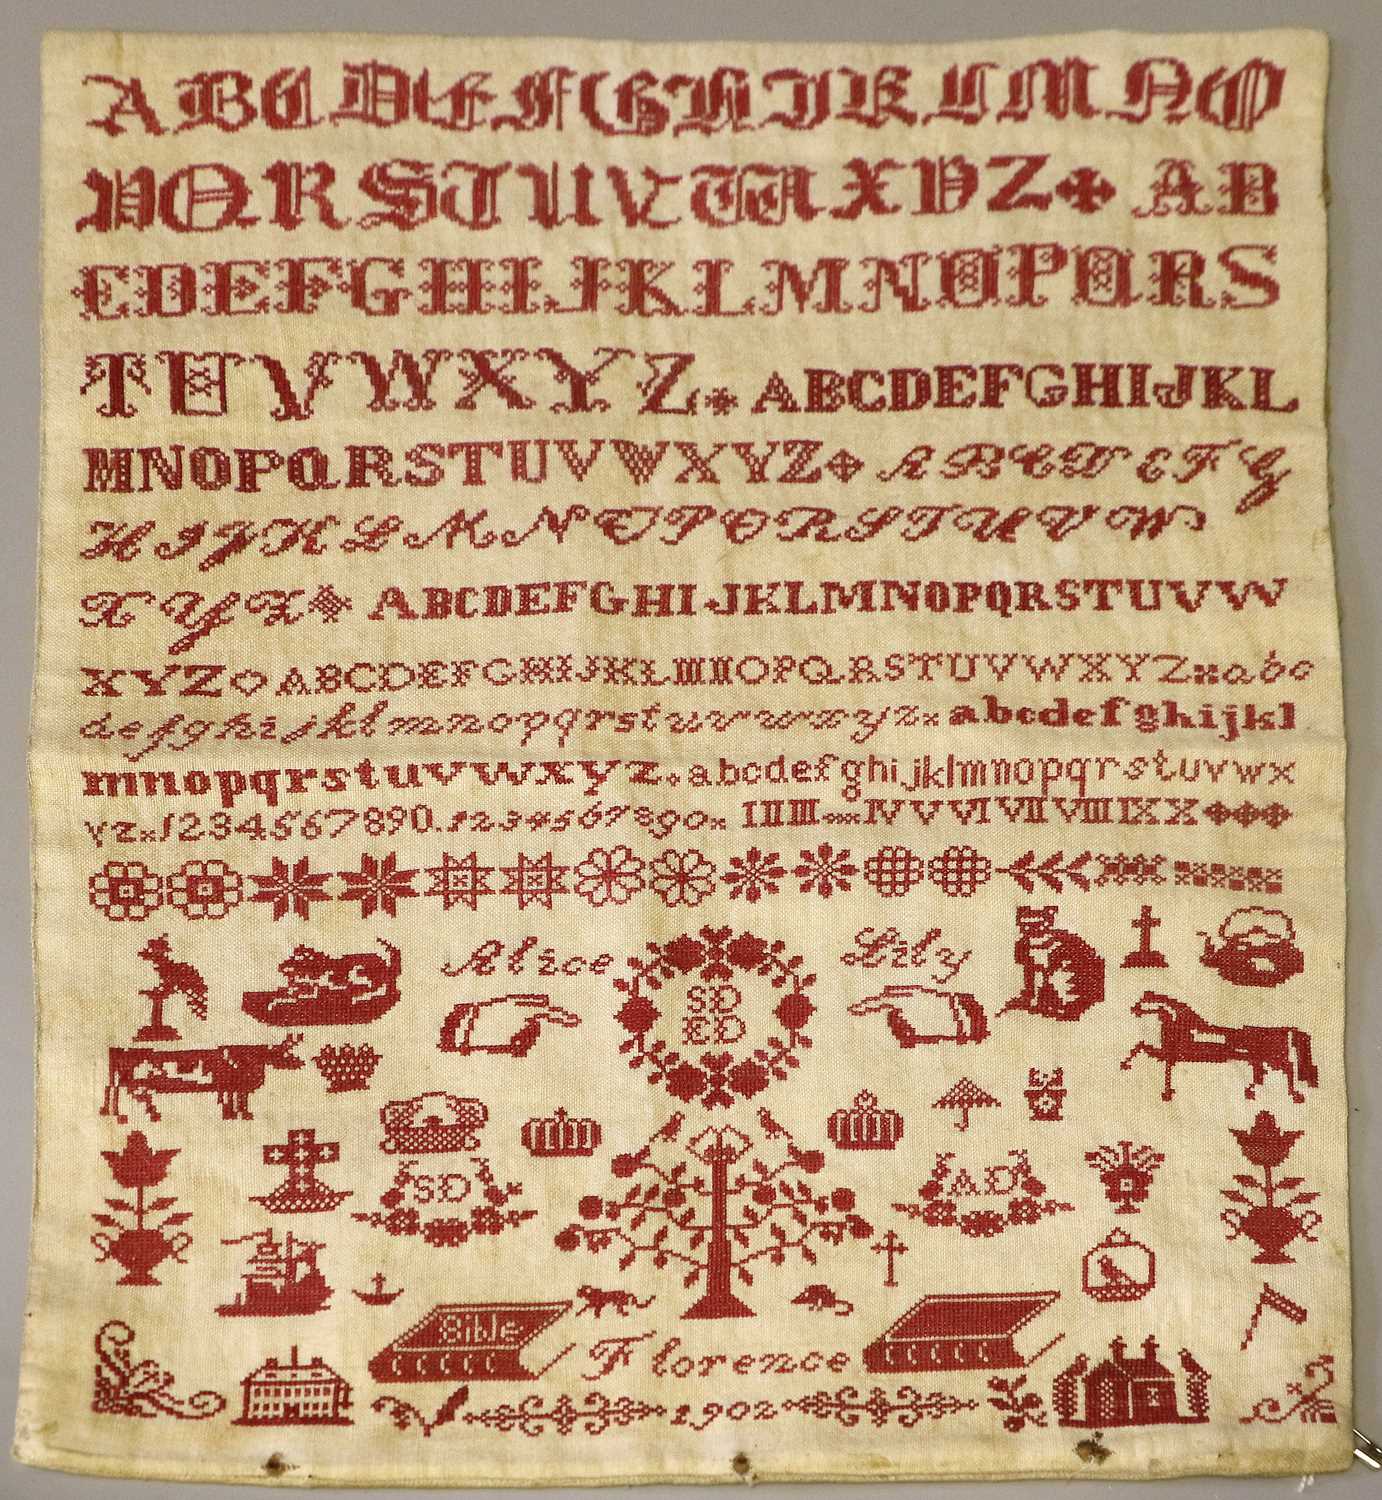 Early 20th Century Ashley Down Orphanage Bristol Unframed Sampler Dated 1902, incorporating the